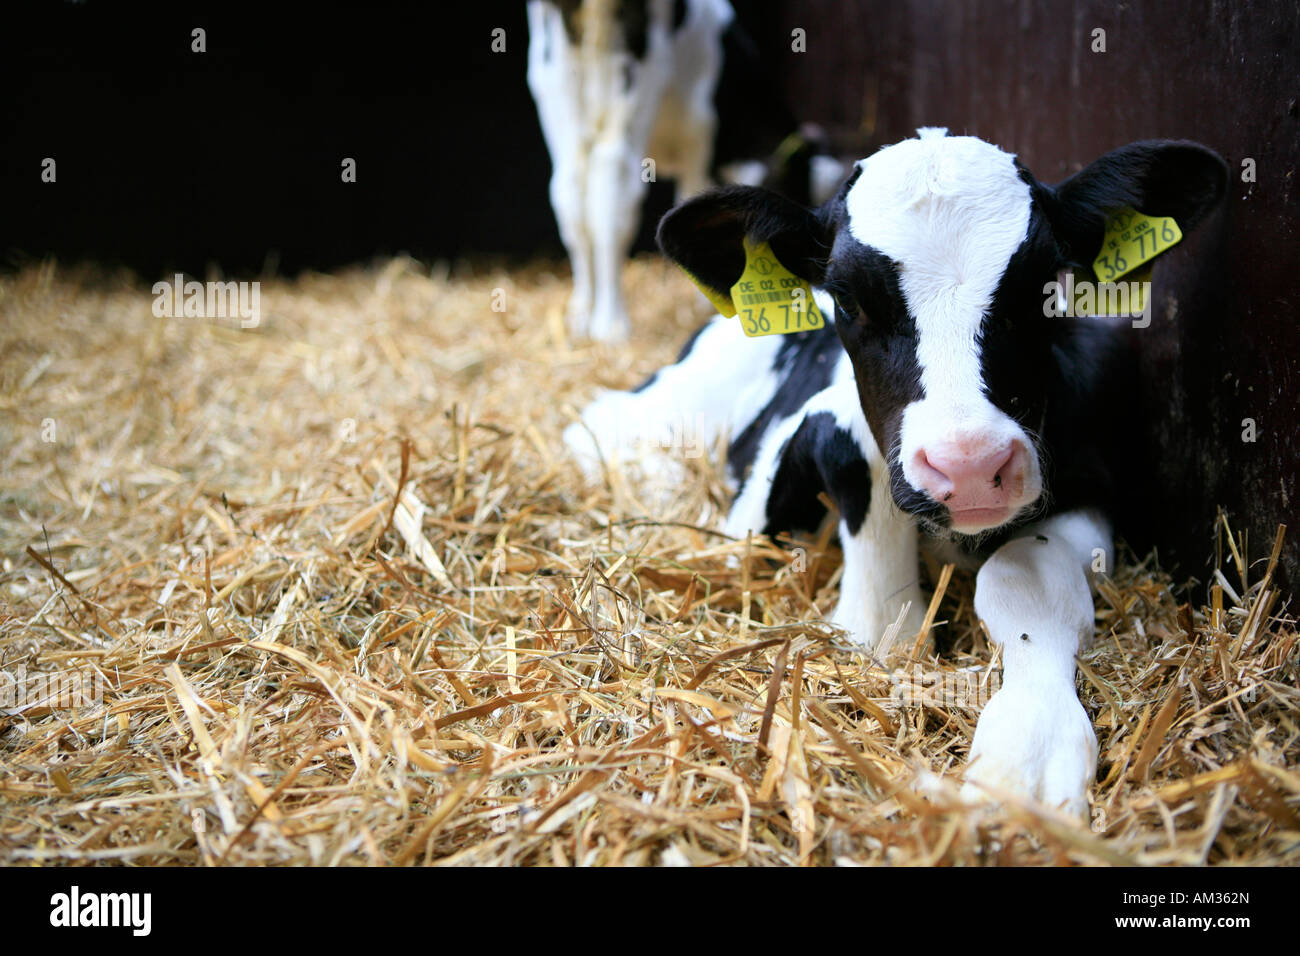 Young cows in the straw, Wohldorf, Hamburg, Germany Stock Photo